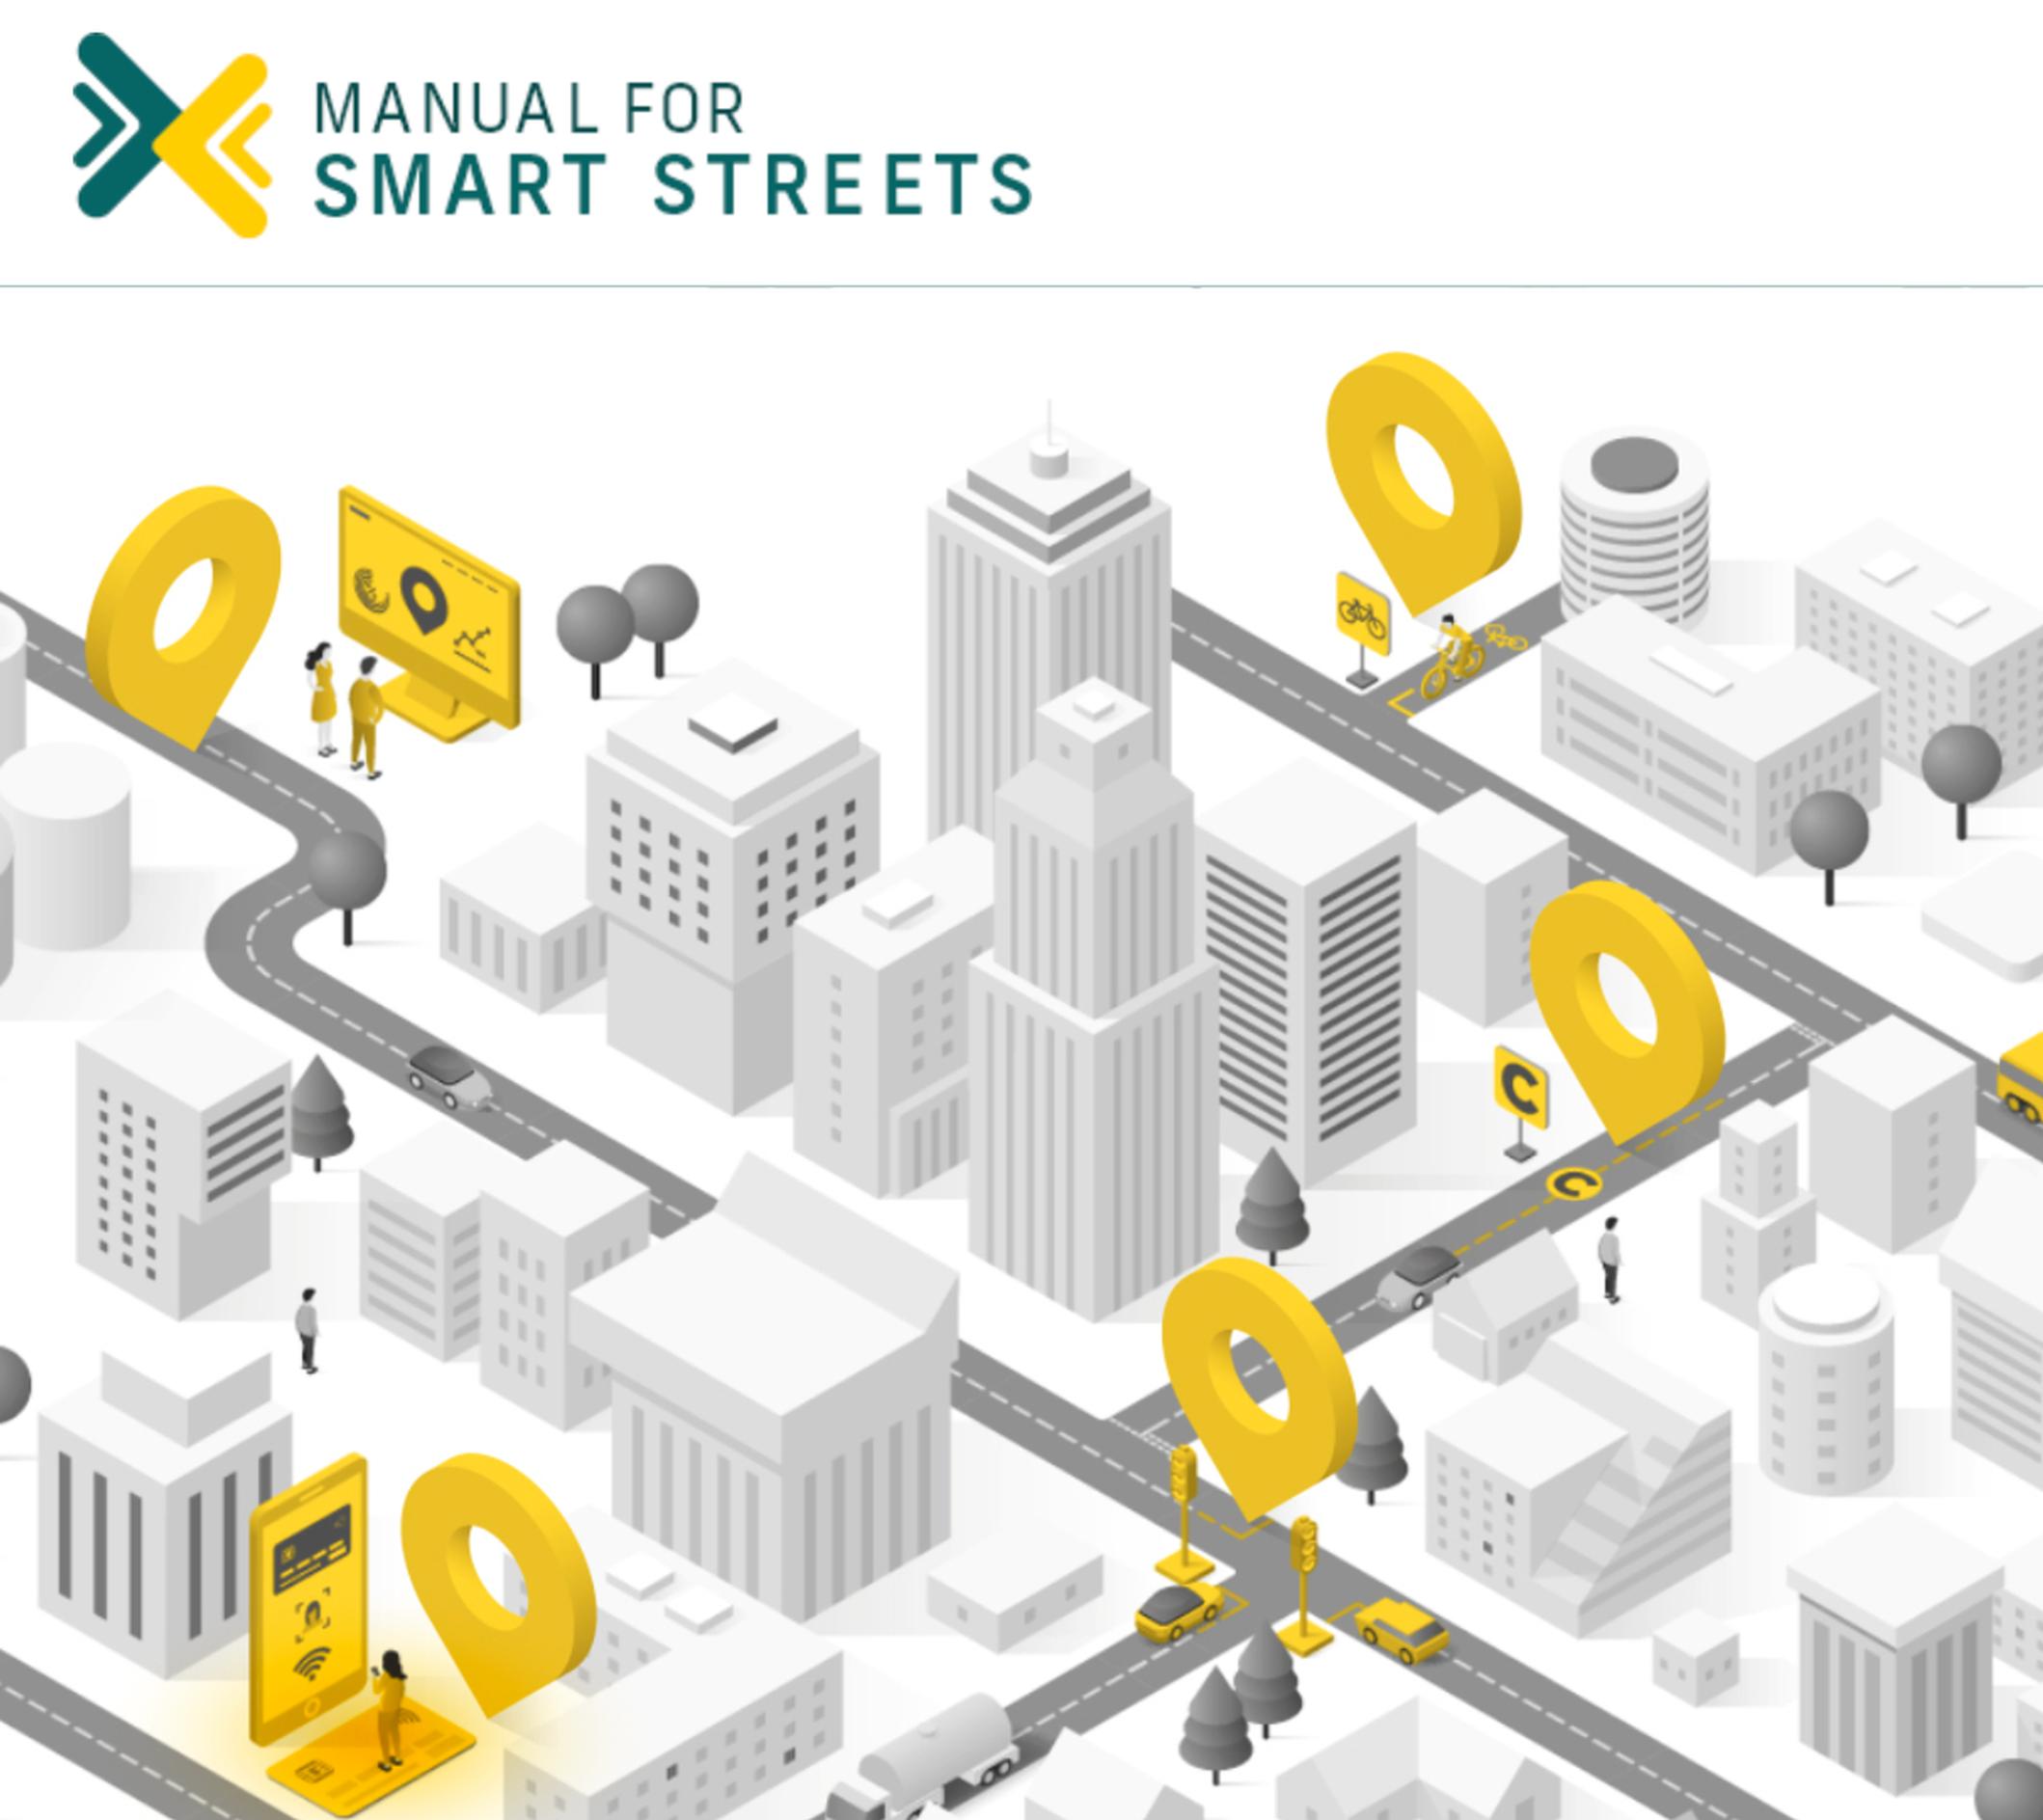 The Manual for Smart Streets